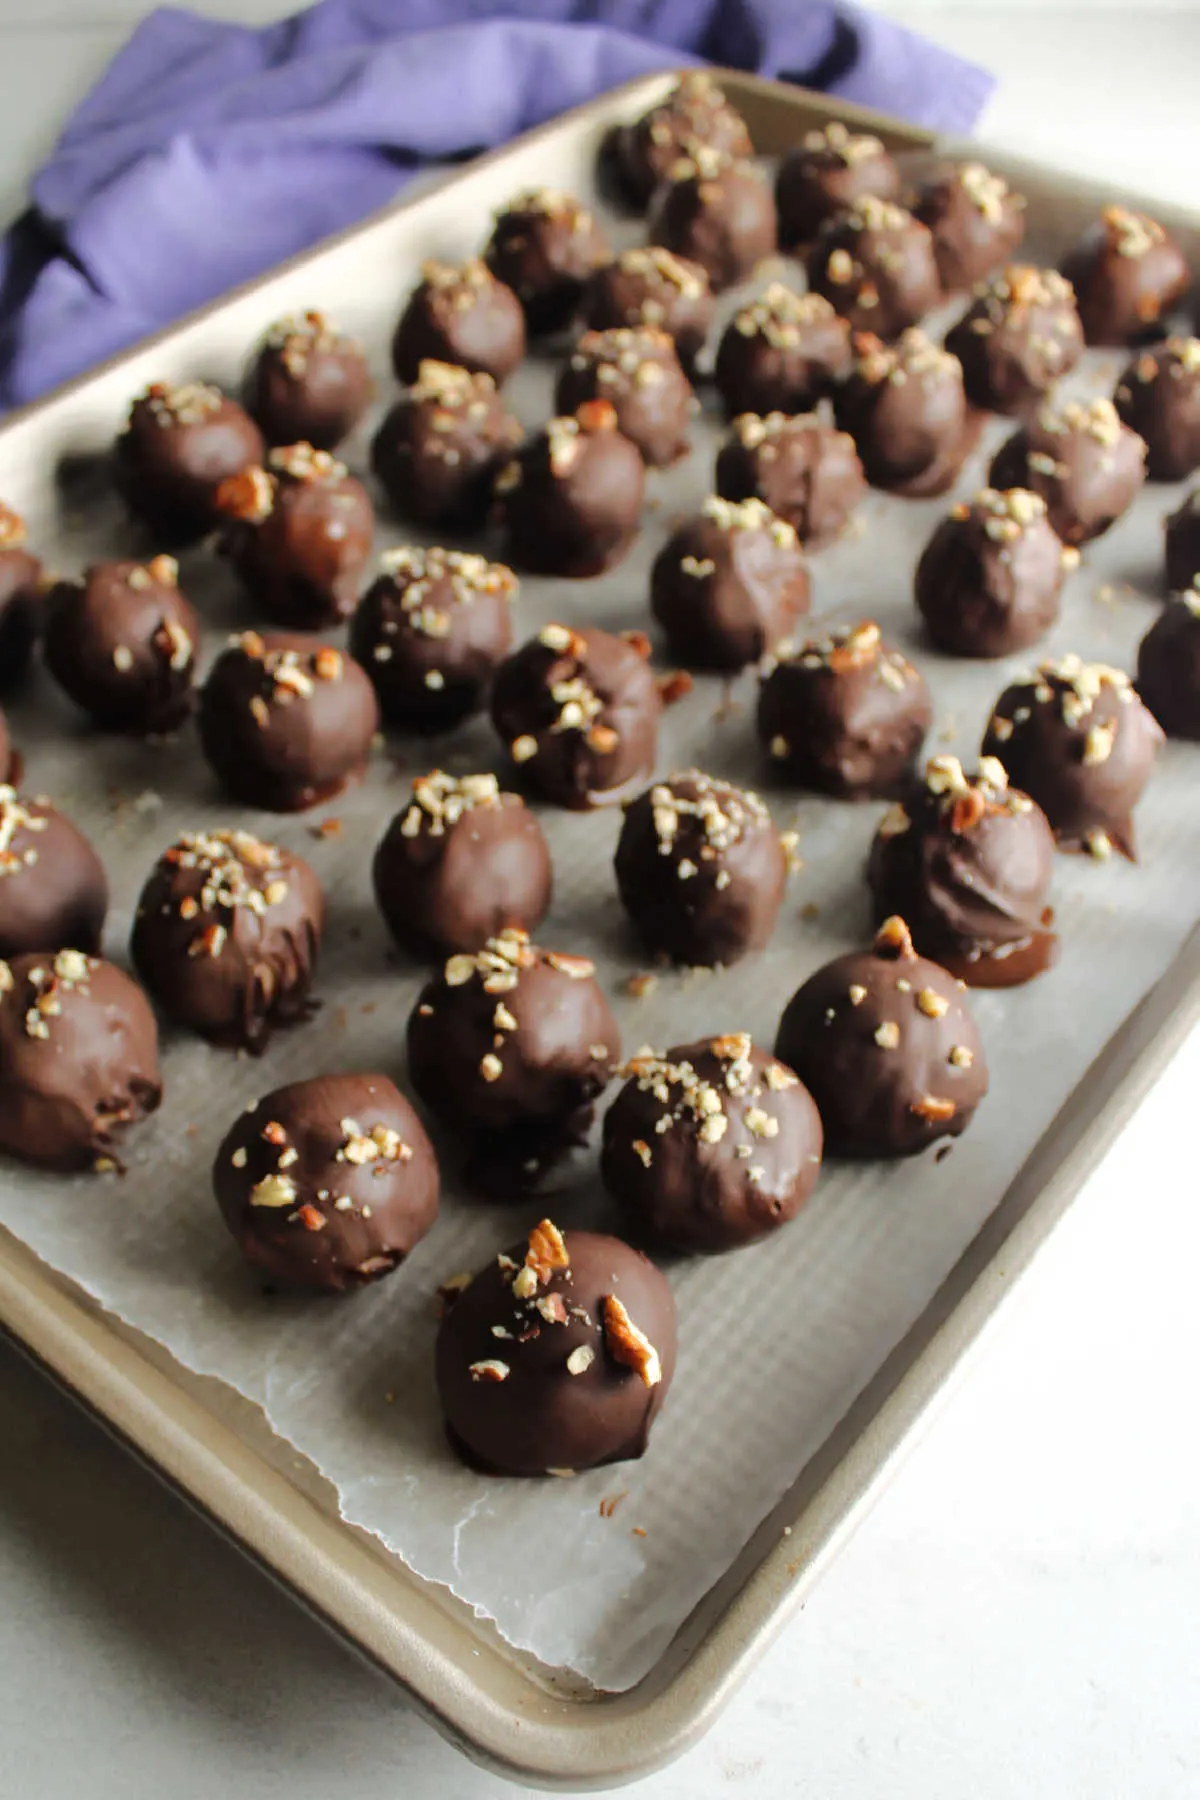 Chocolate coated coconut bon bons topped with bits of chopped pecans, setting up on wax paper lined tray.